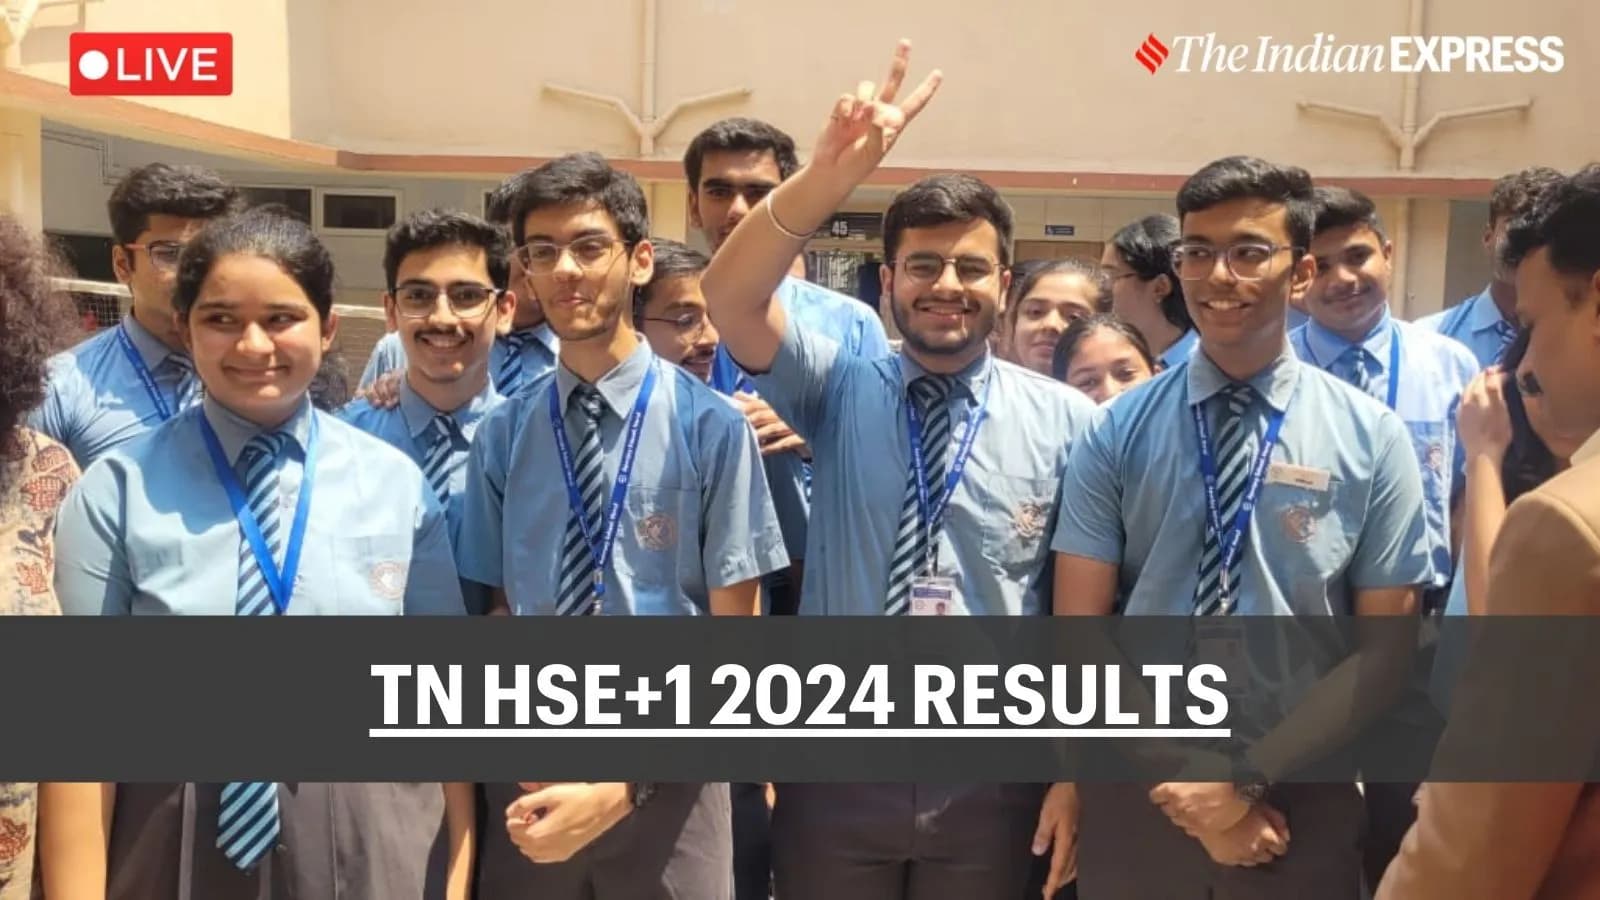 TN HSE +1 Result 2024 Live: TN HSE+1 Results declaring on May 14